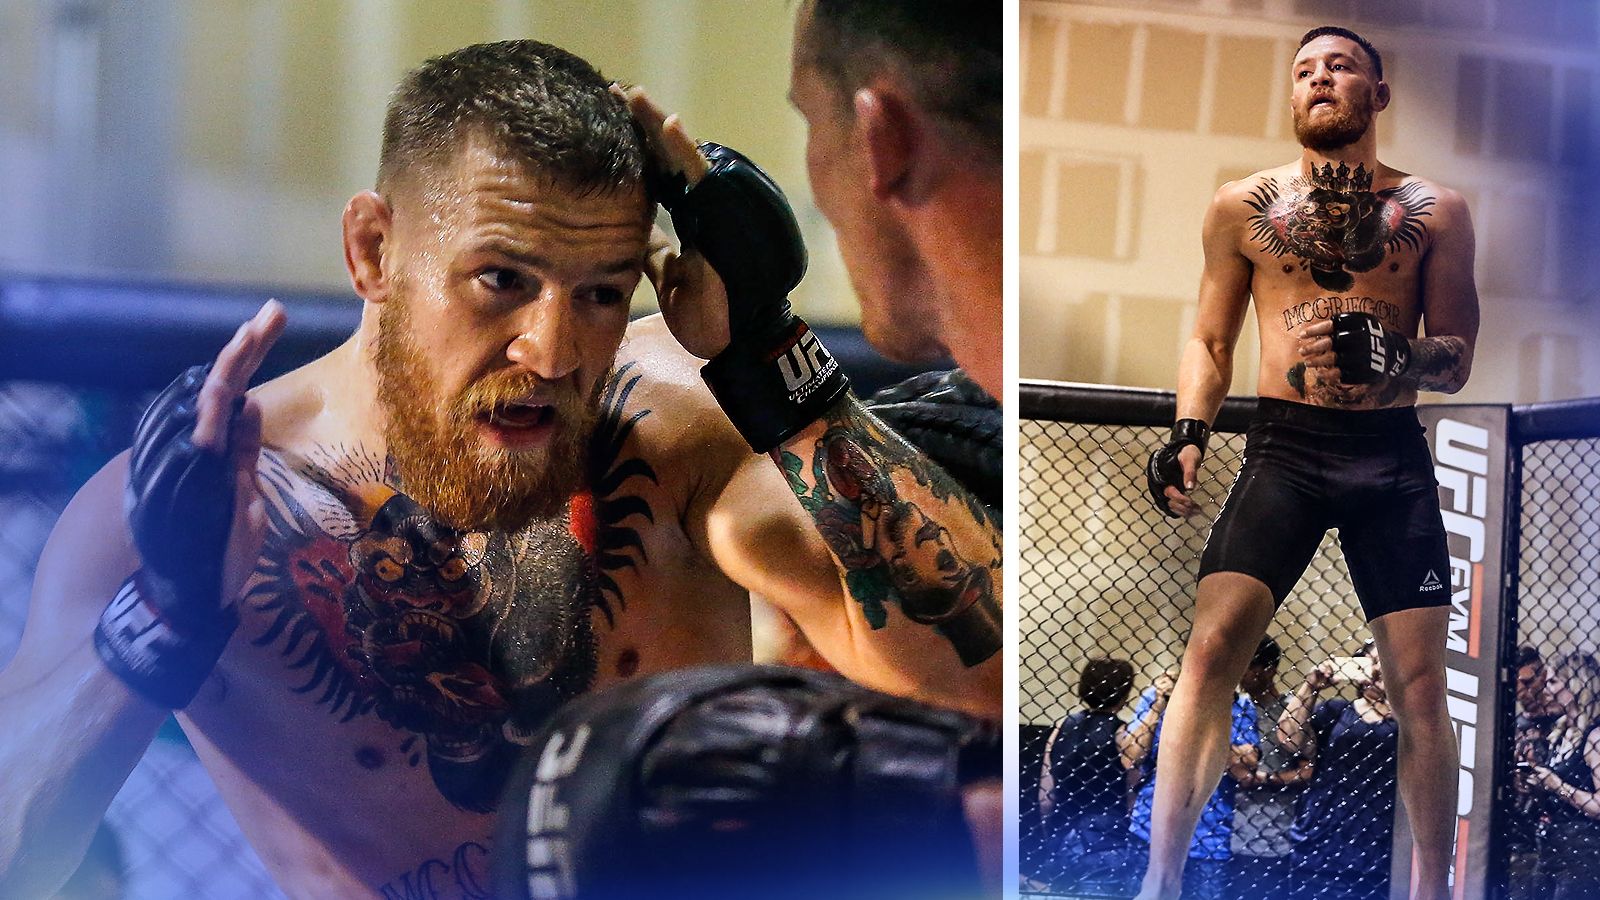 Conor McGregor's restructured training to fight Nate Diaz at UFC 202  revealed, WWE News